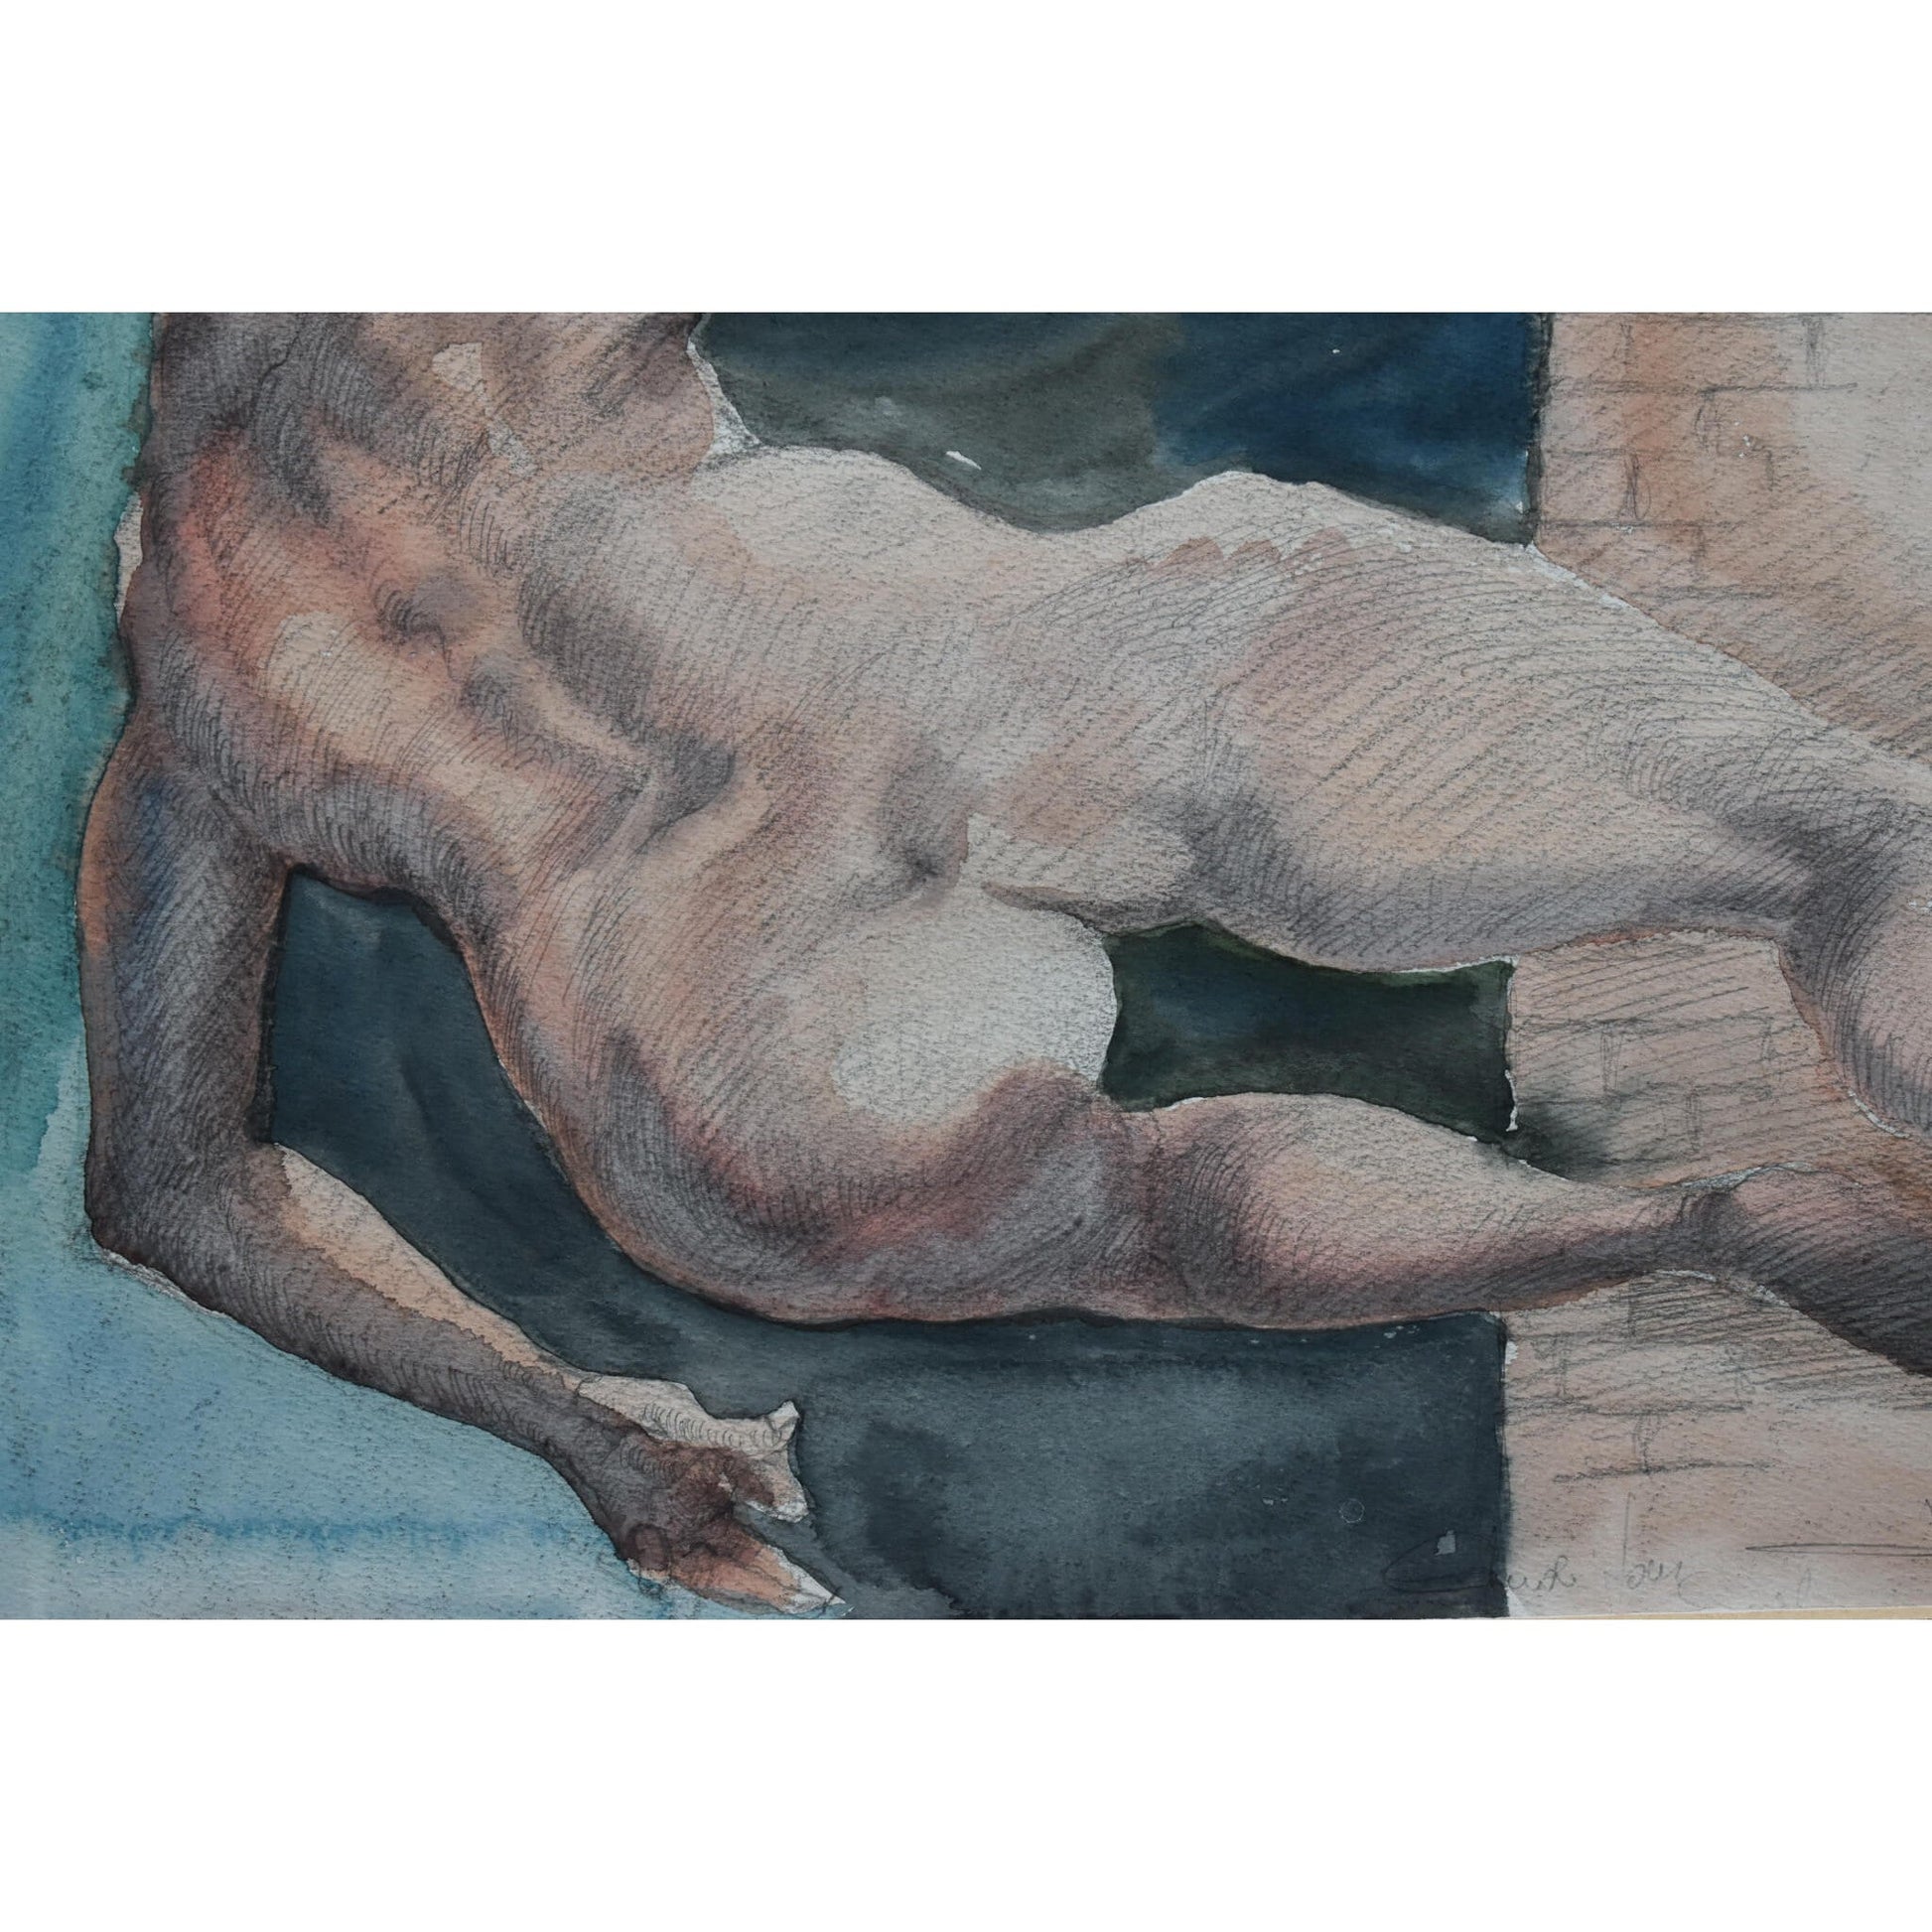 Modern watercolour painting nude figure original 1991 expressionist art by Roger Coppe for sale at Winckelmann Gallery